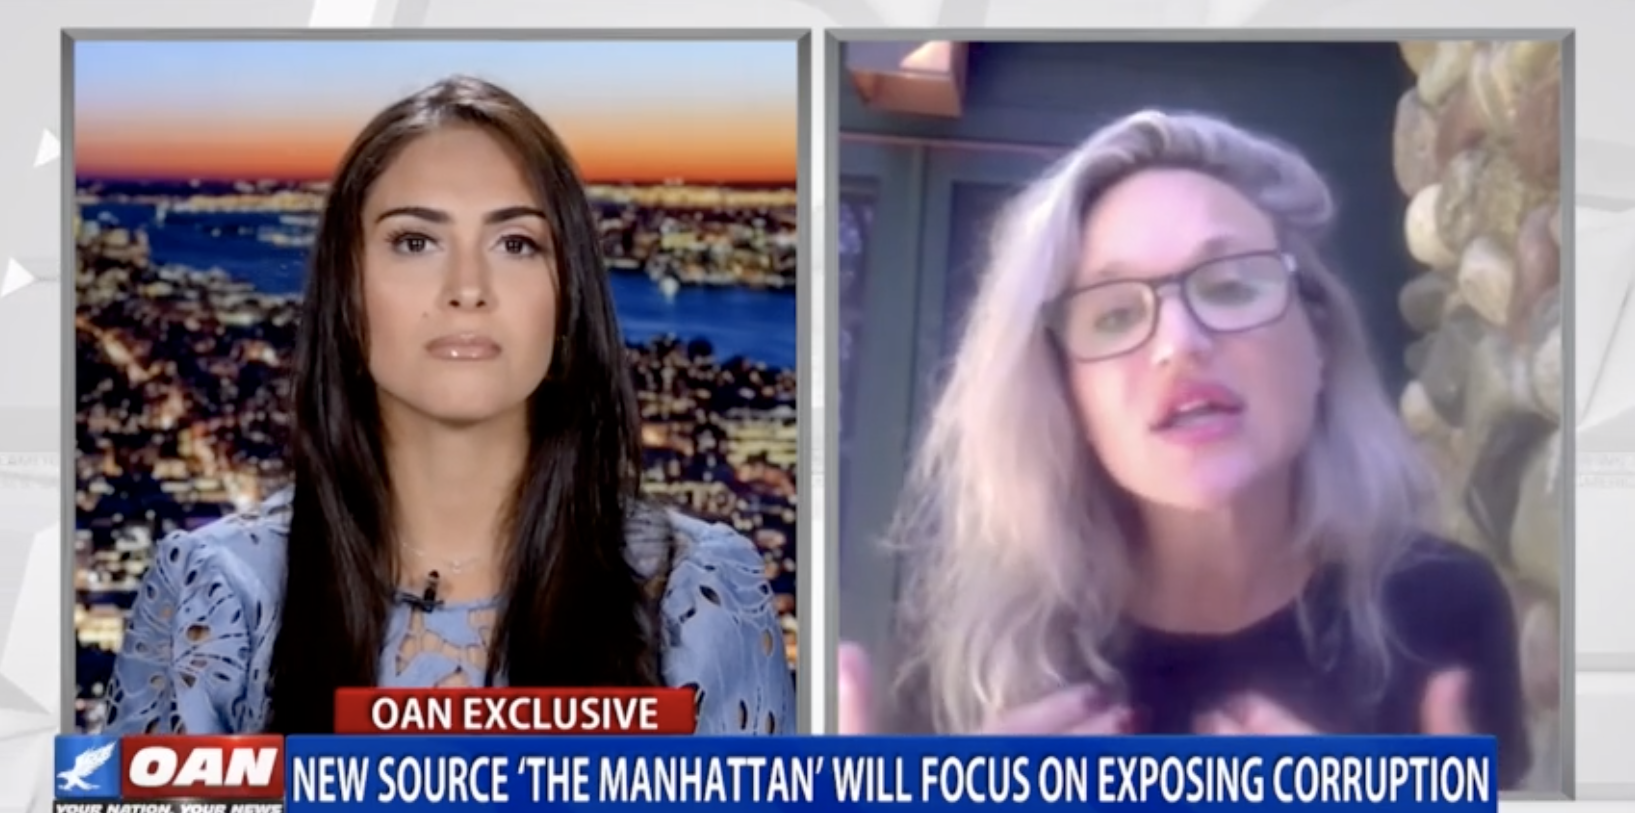 OANN: New Source 'The Manhattan' Will Focus On Exposing Corruption